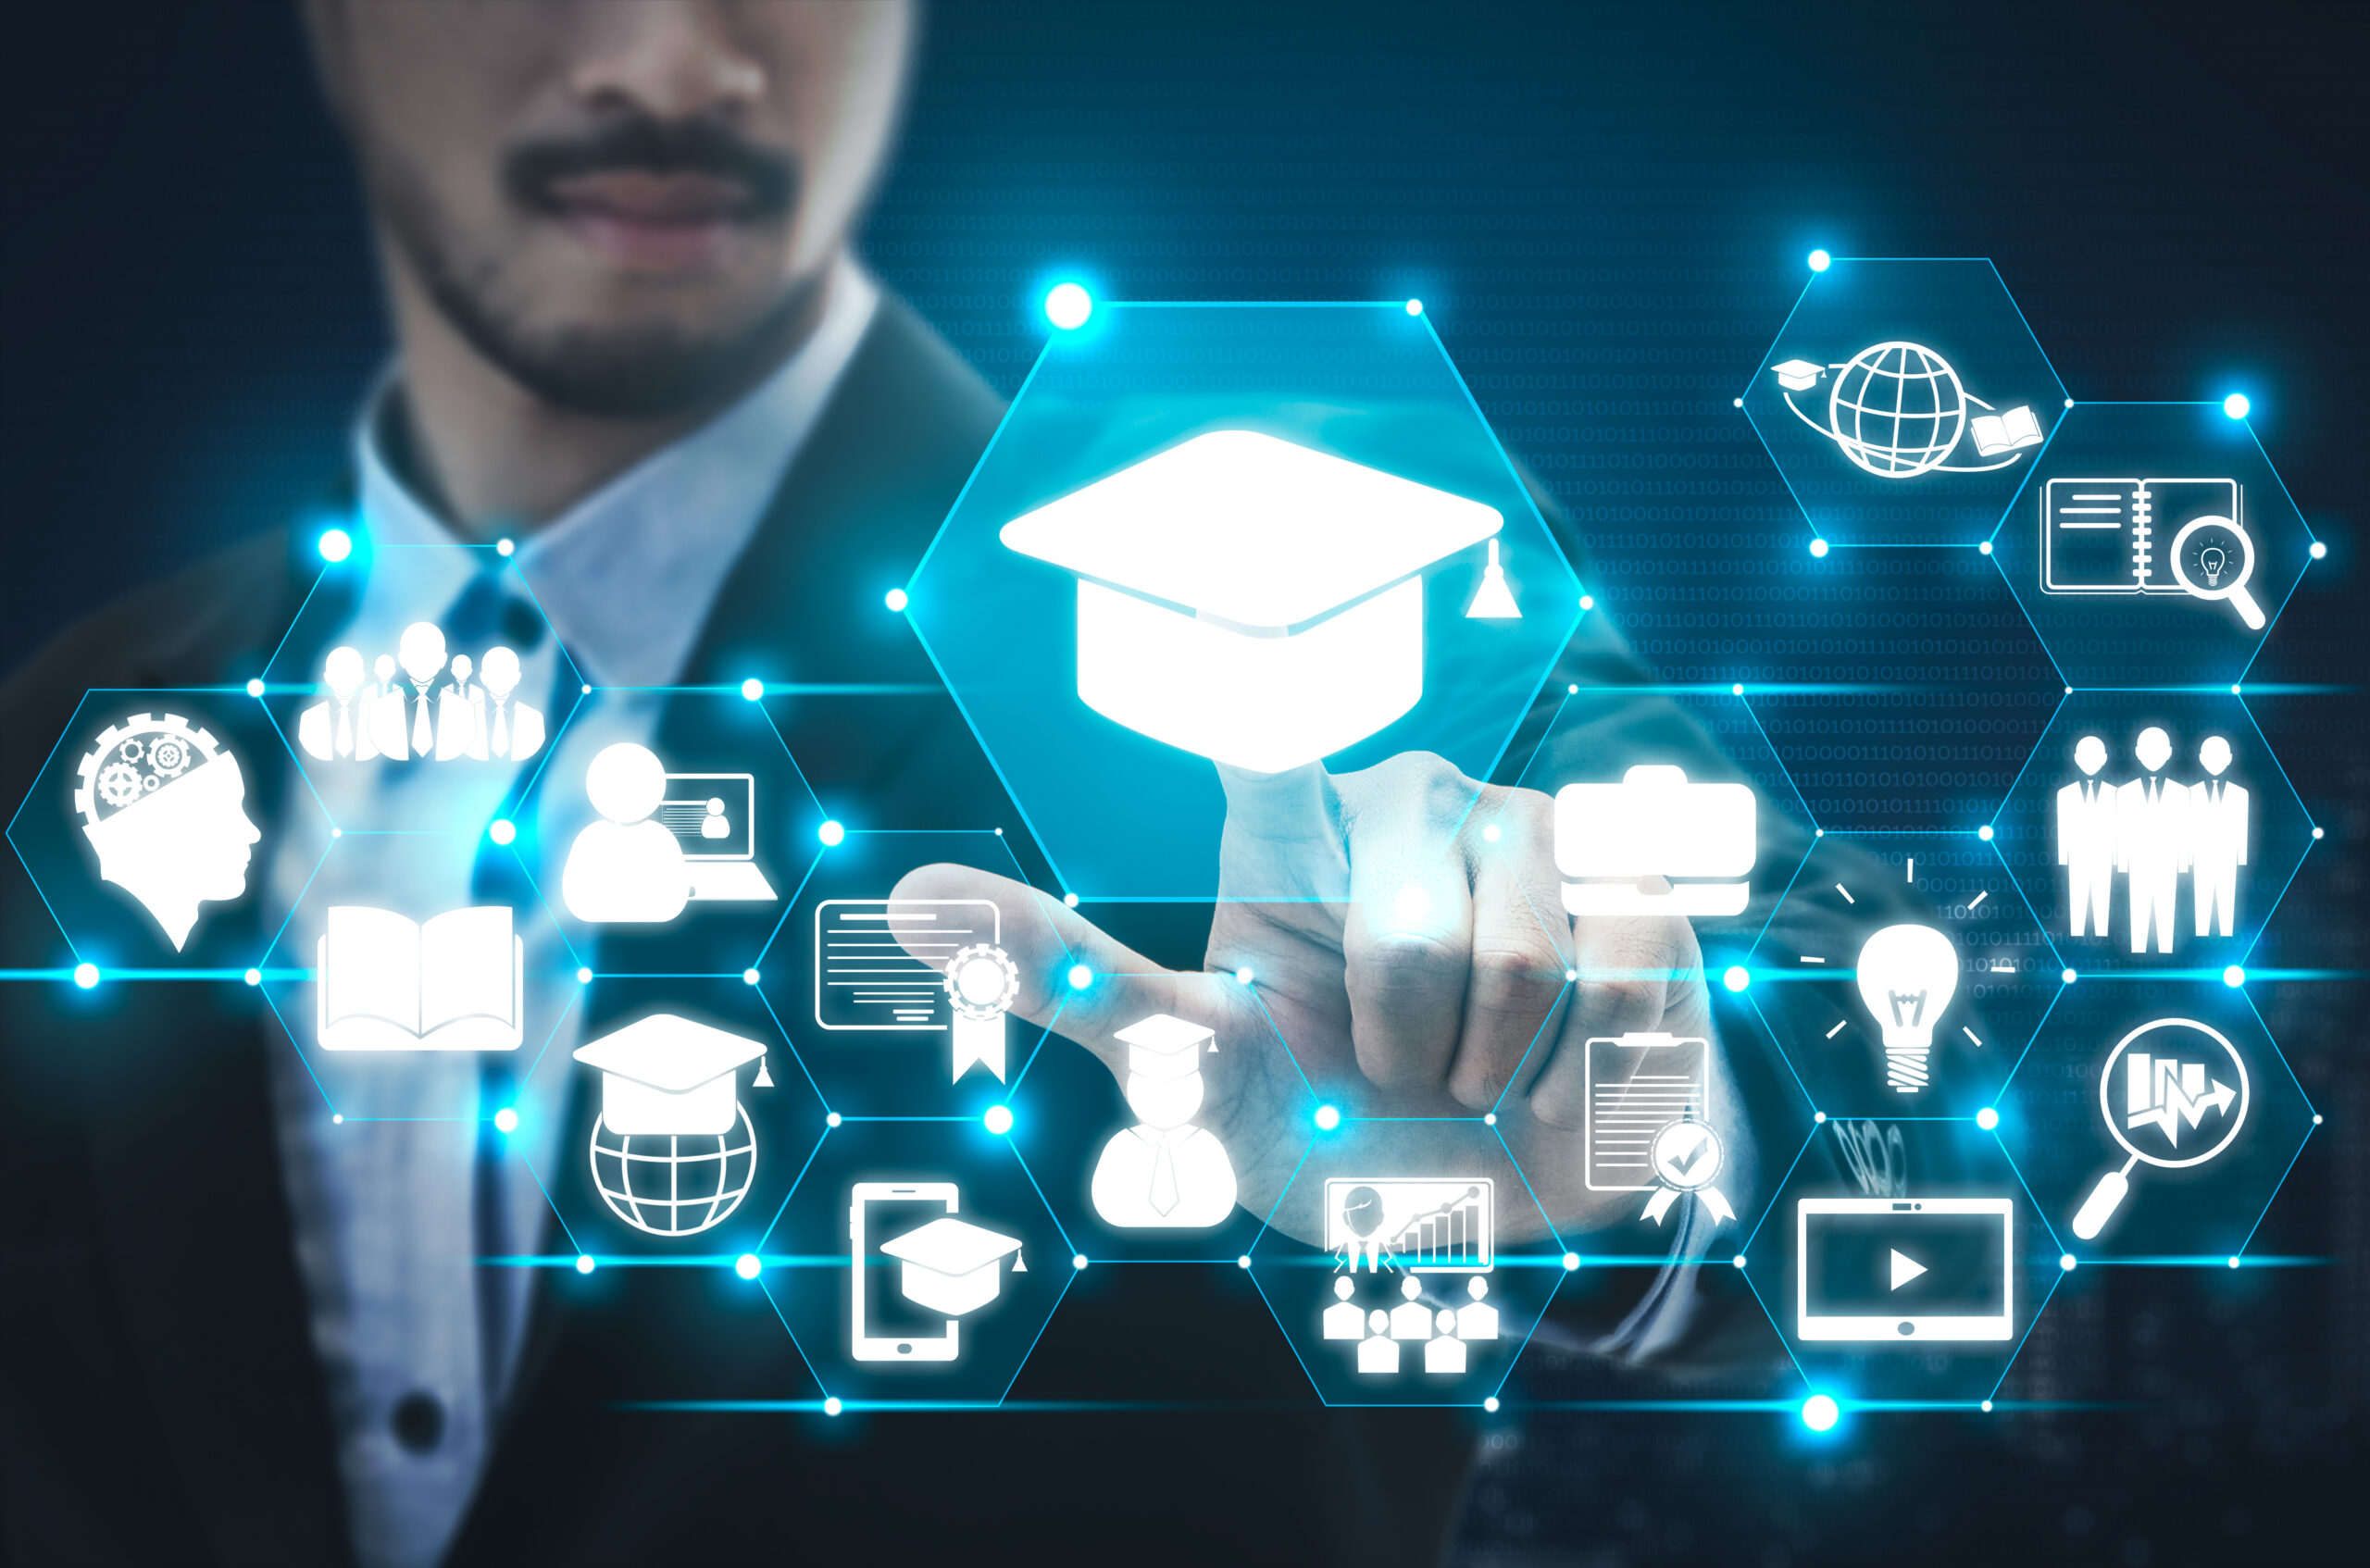 Higher Education CIOs choosing tech for institution